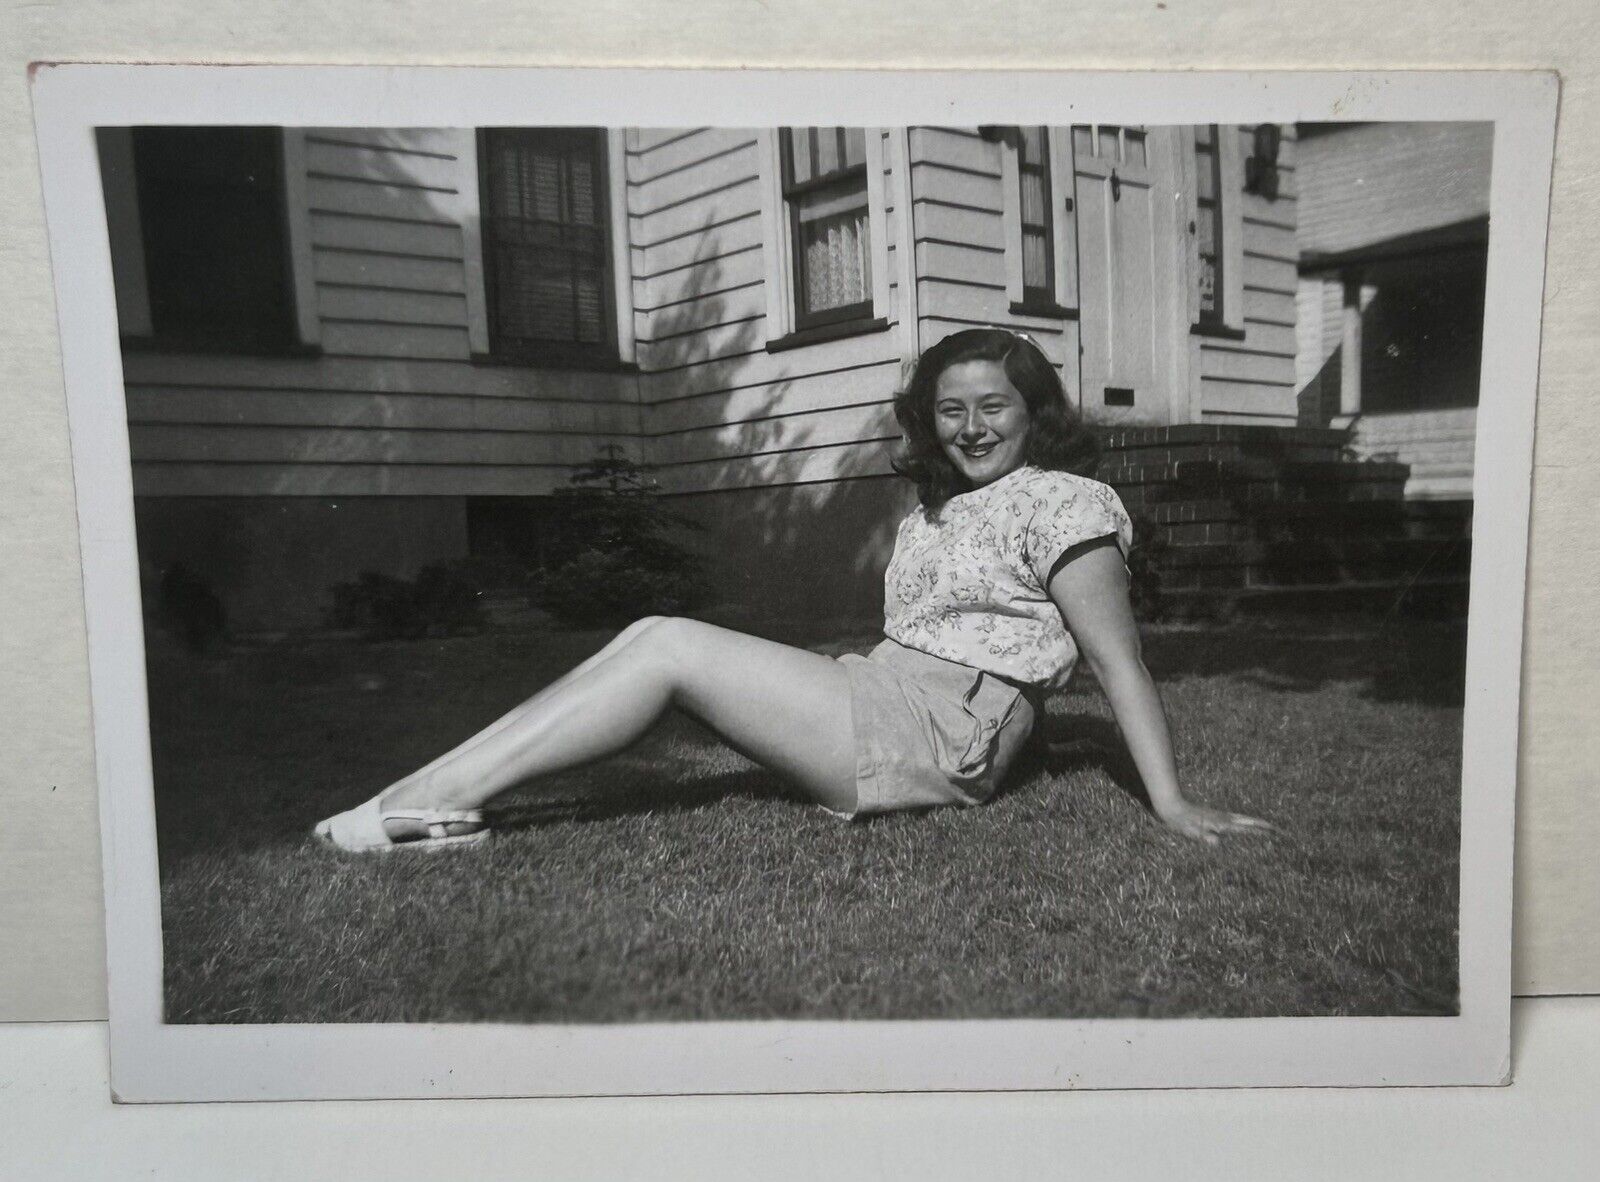 Curvy Sexy Pretty Young Women Leggy 1940s Vintage Photograph Estate Find 3”x 2.5